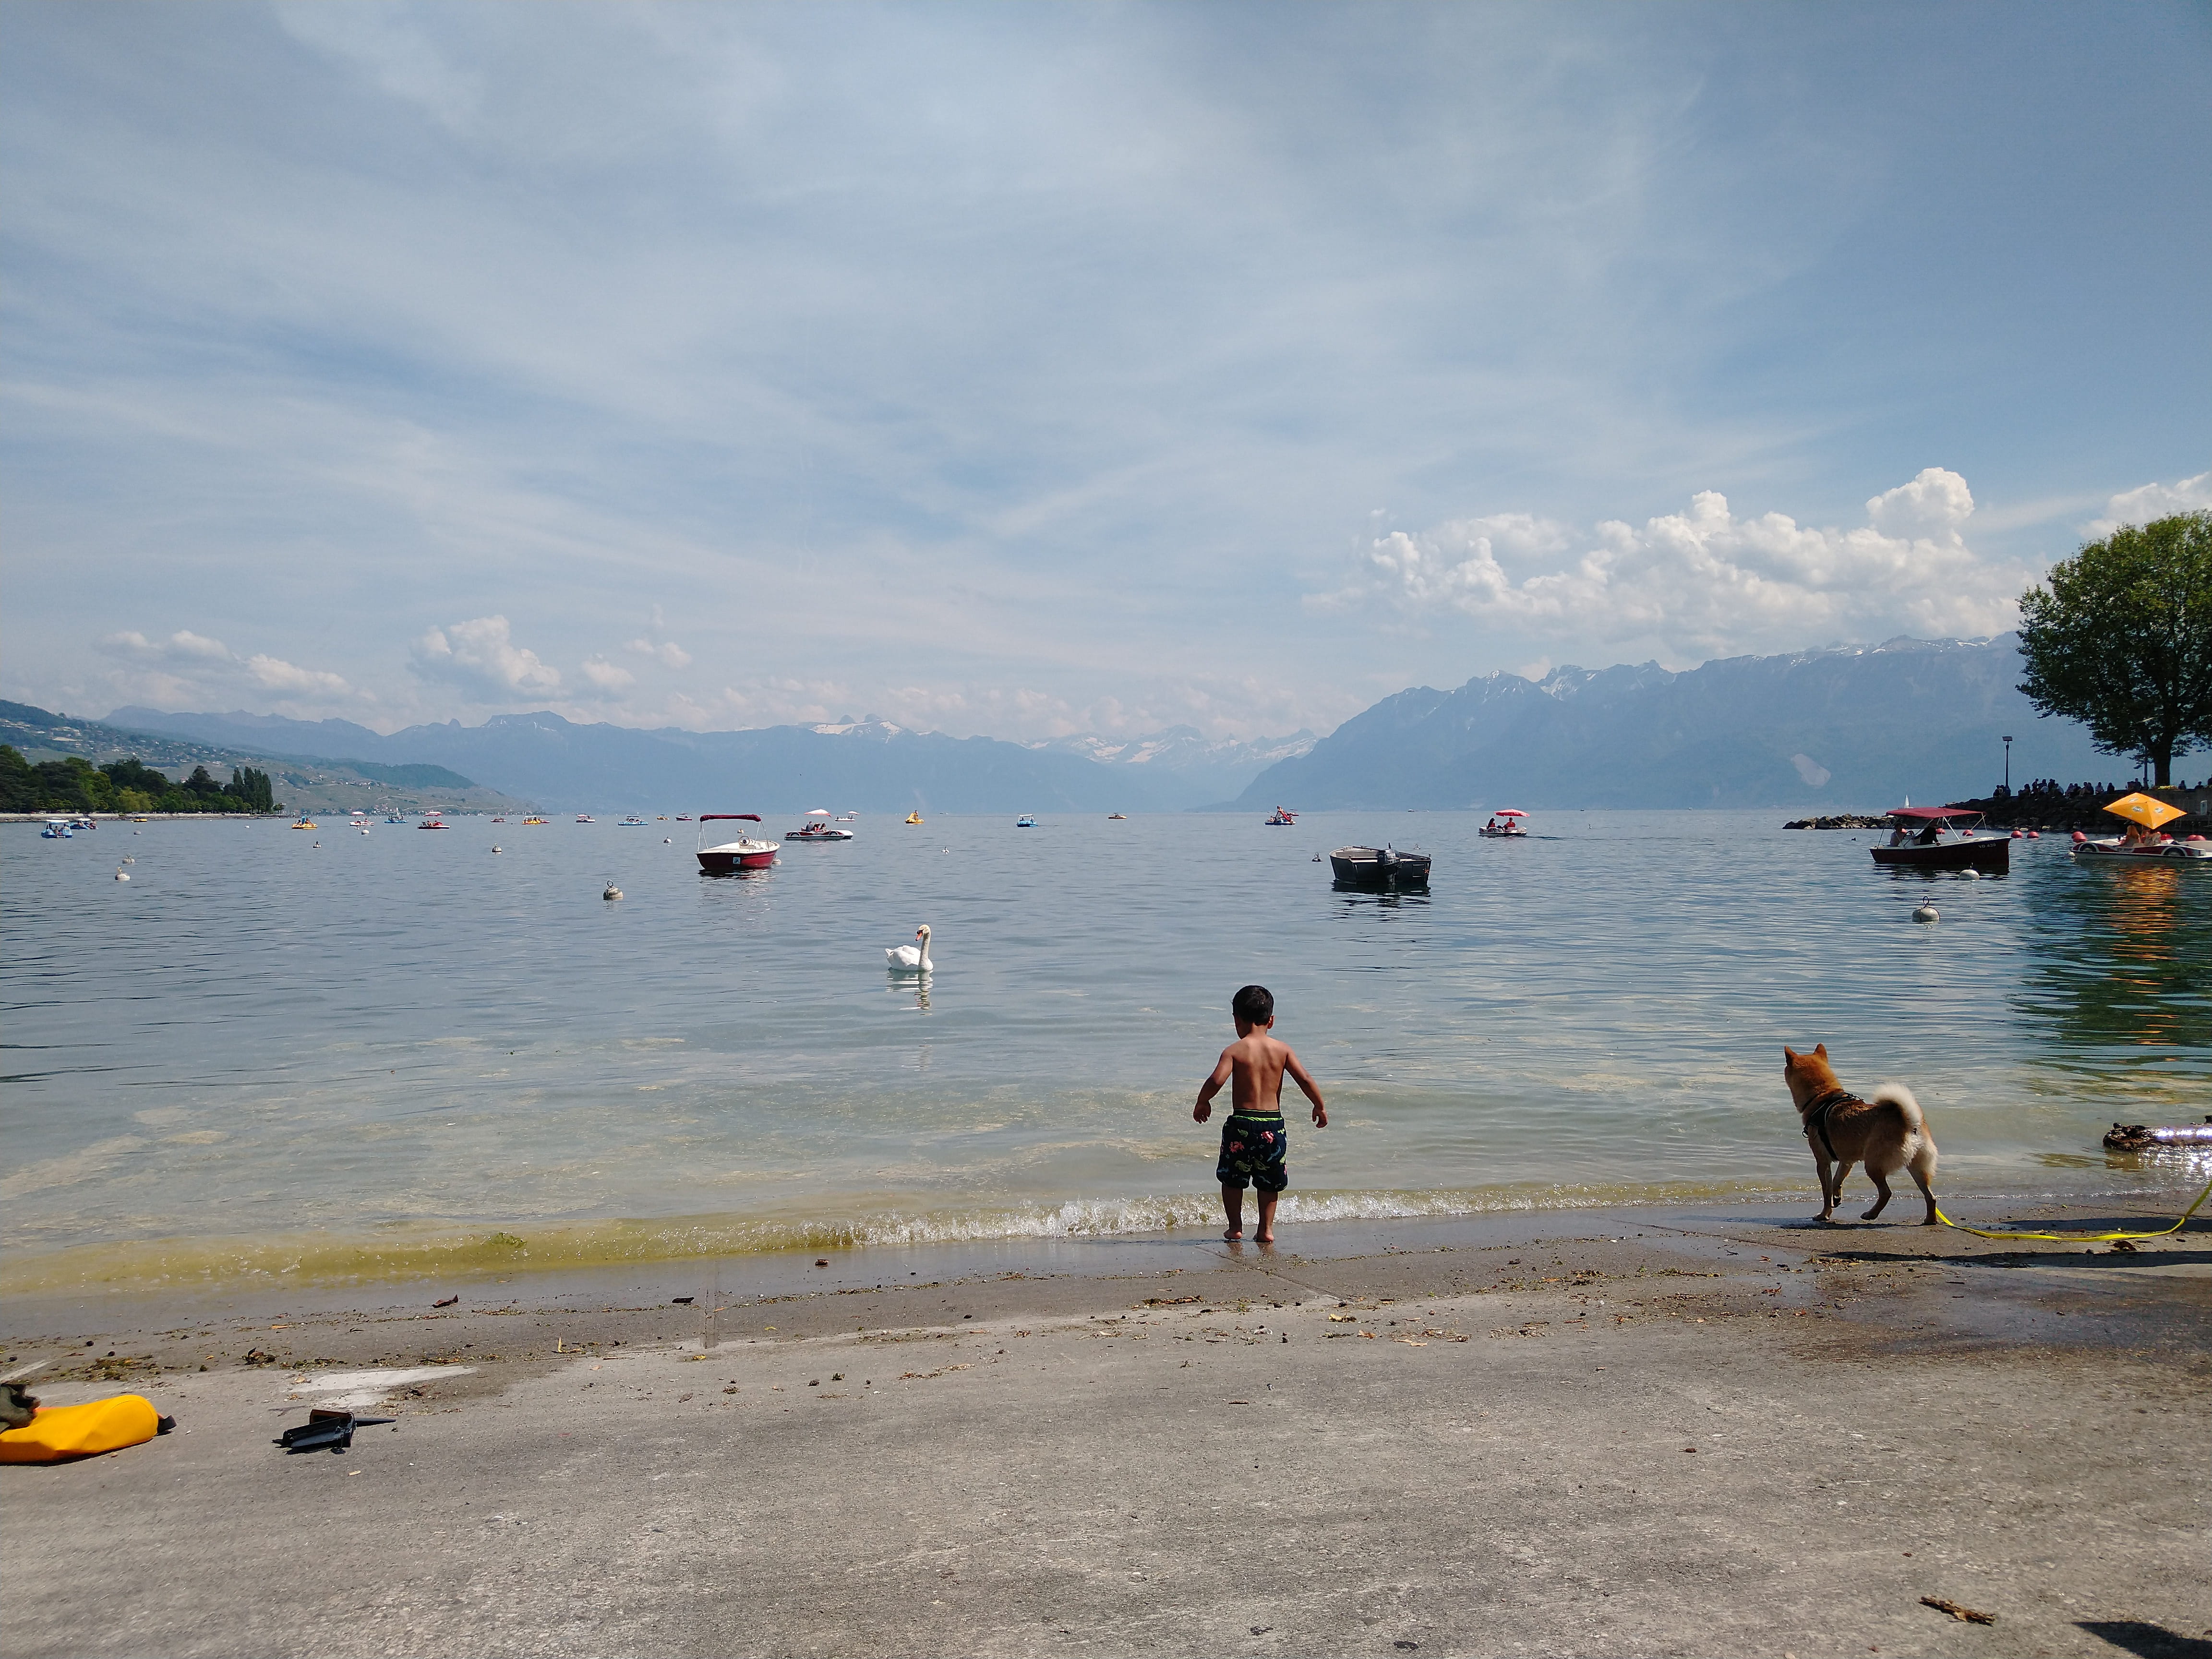 Cooling down the legs at the shore of Lac Léman